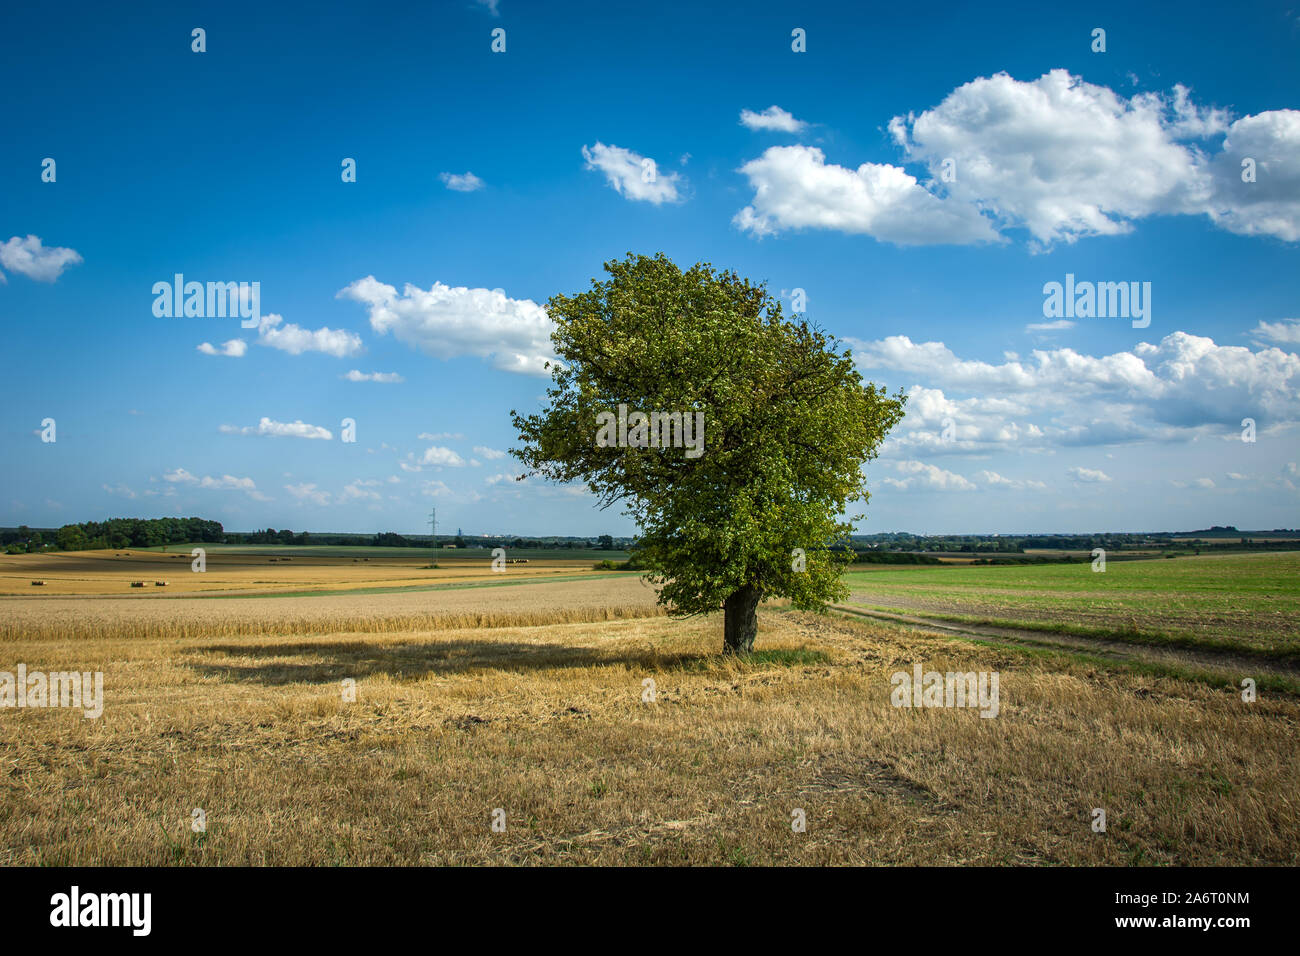 Large green tree growing in a field, clouds and blue sky Stock Photo